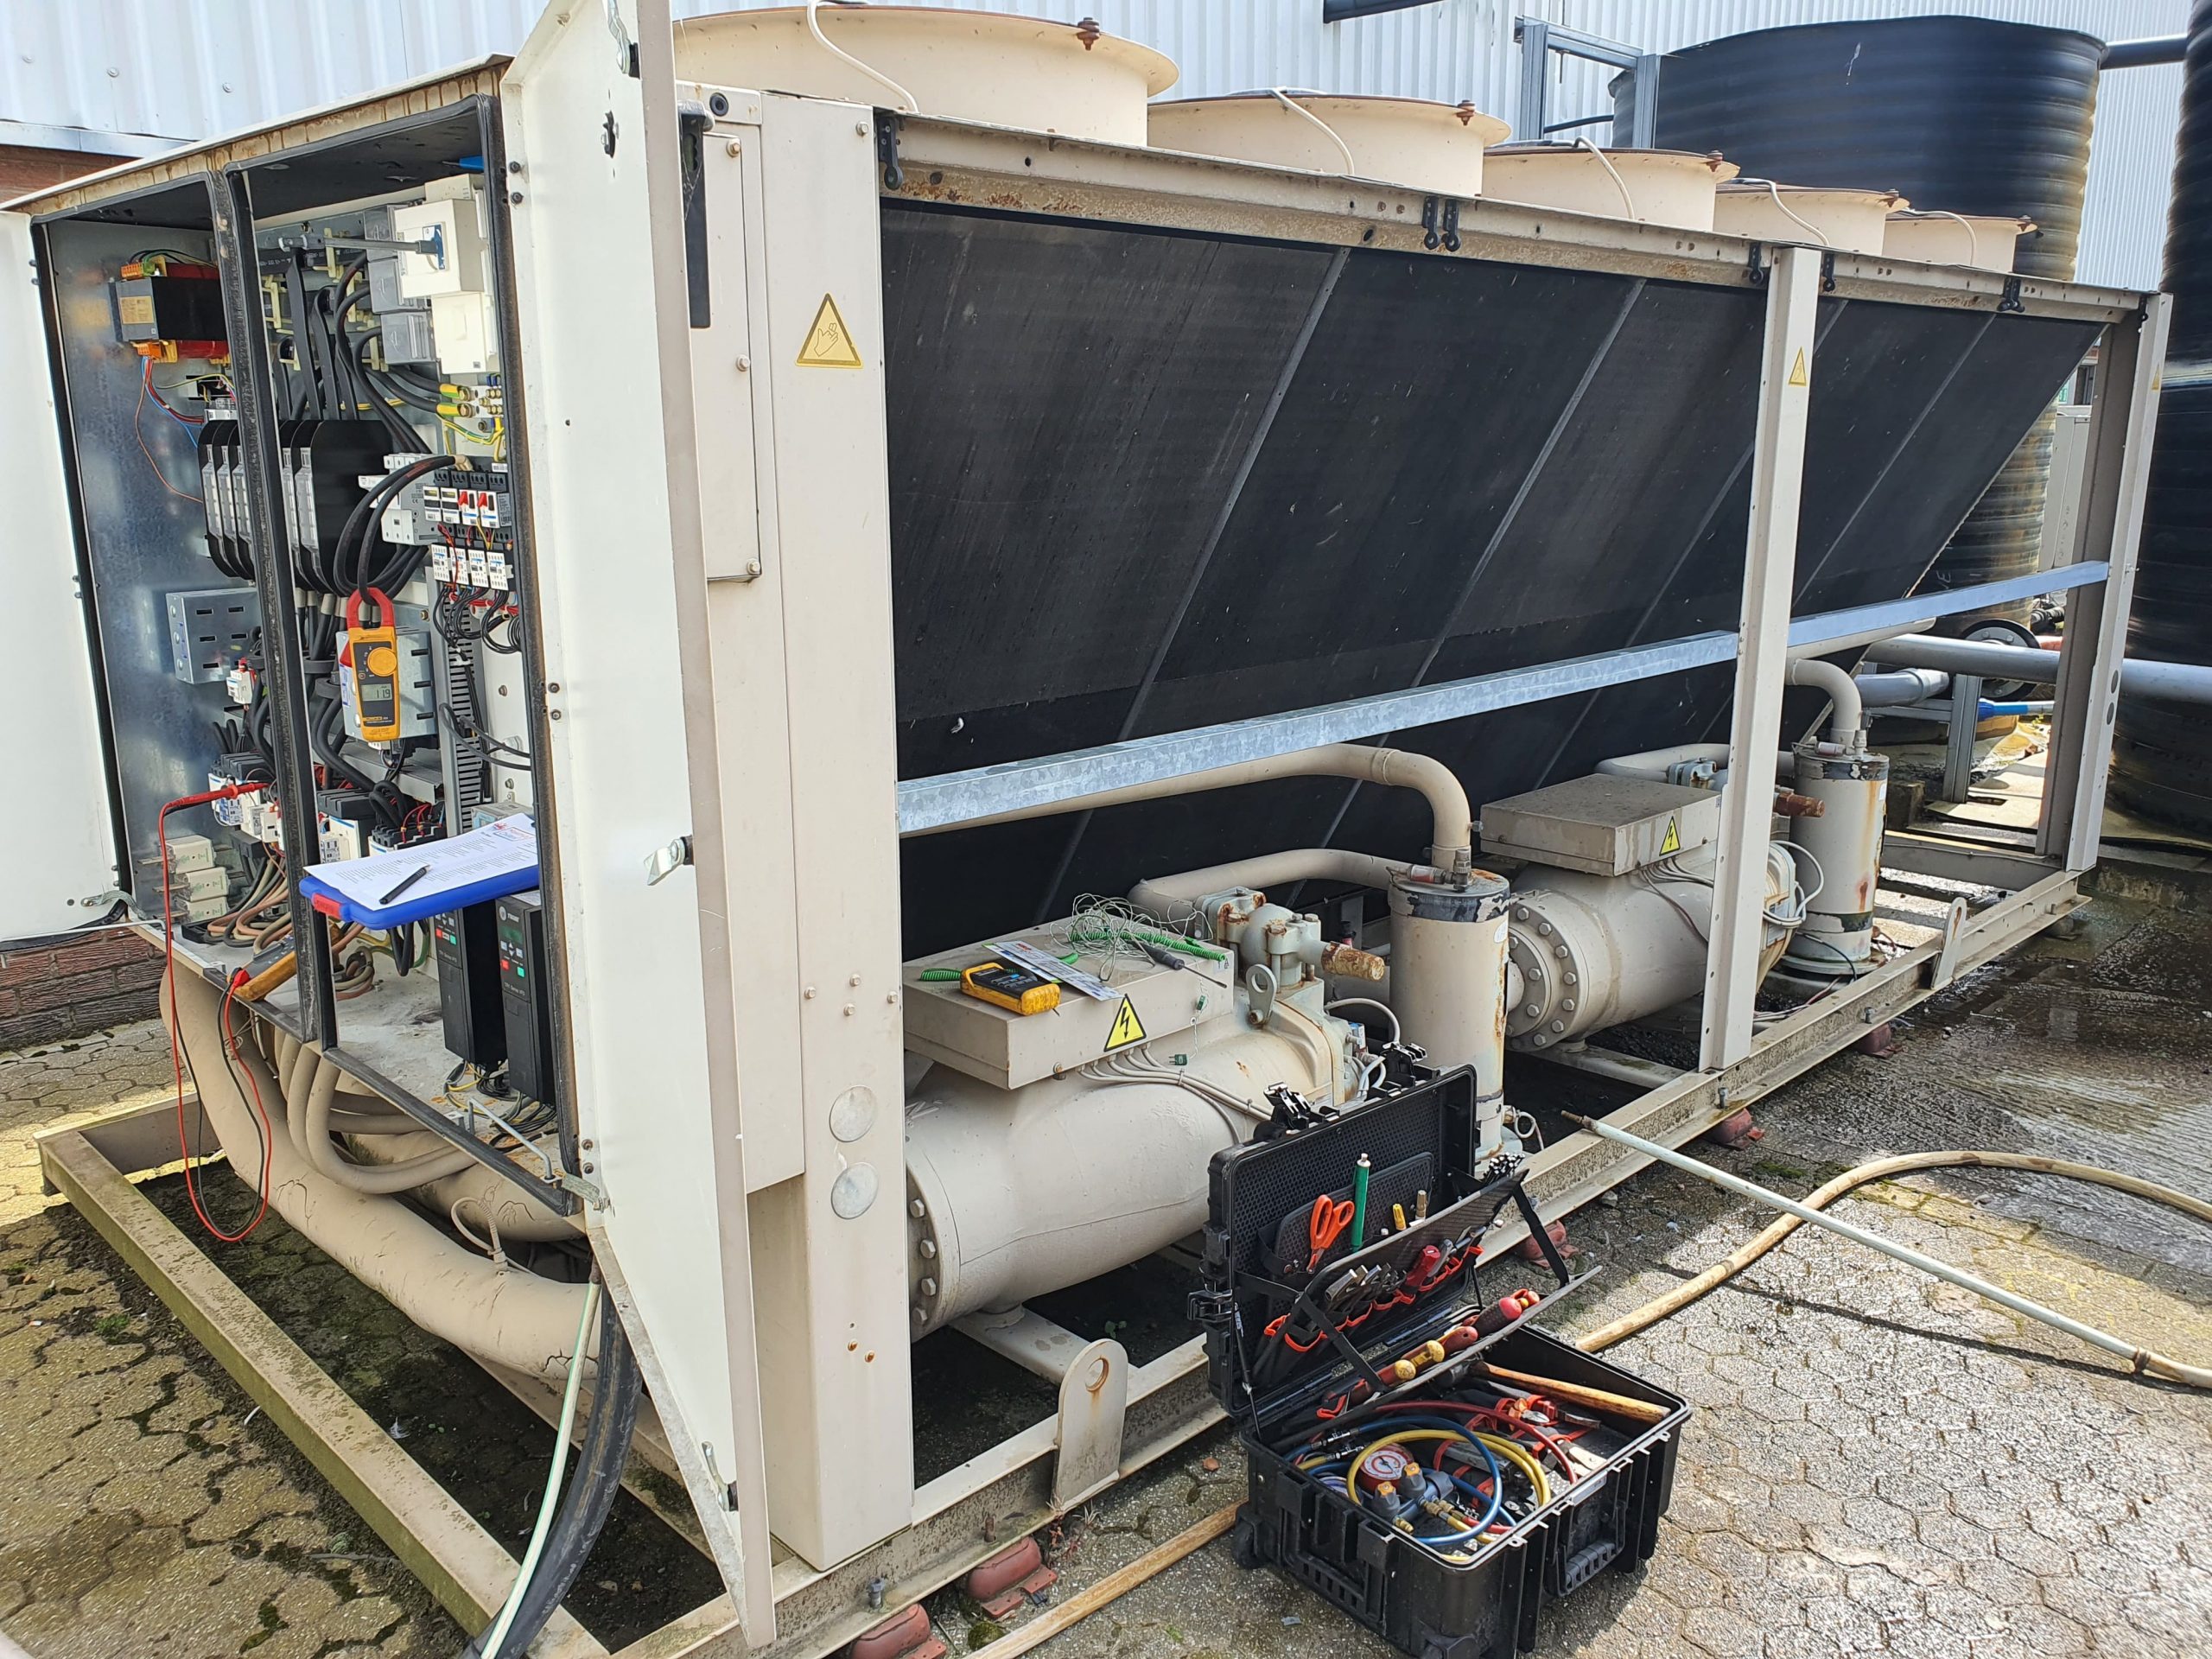 Large air cooled brown chiller with test equipment during planned preventative chiller maintenance